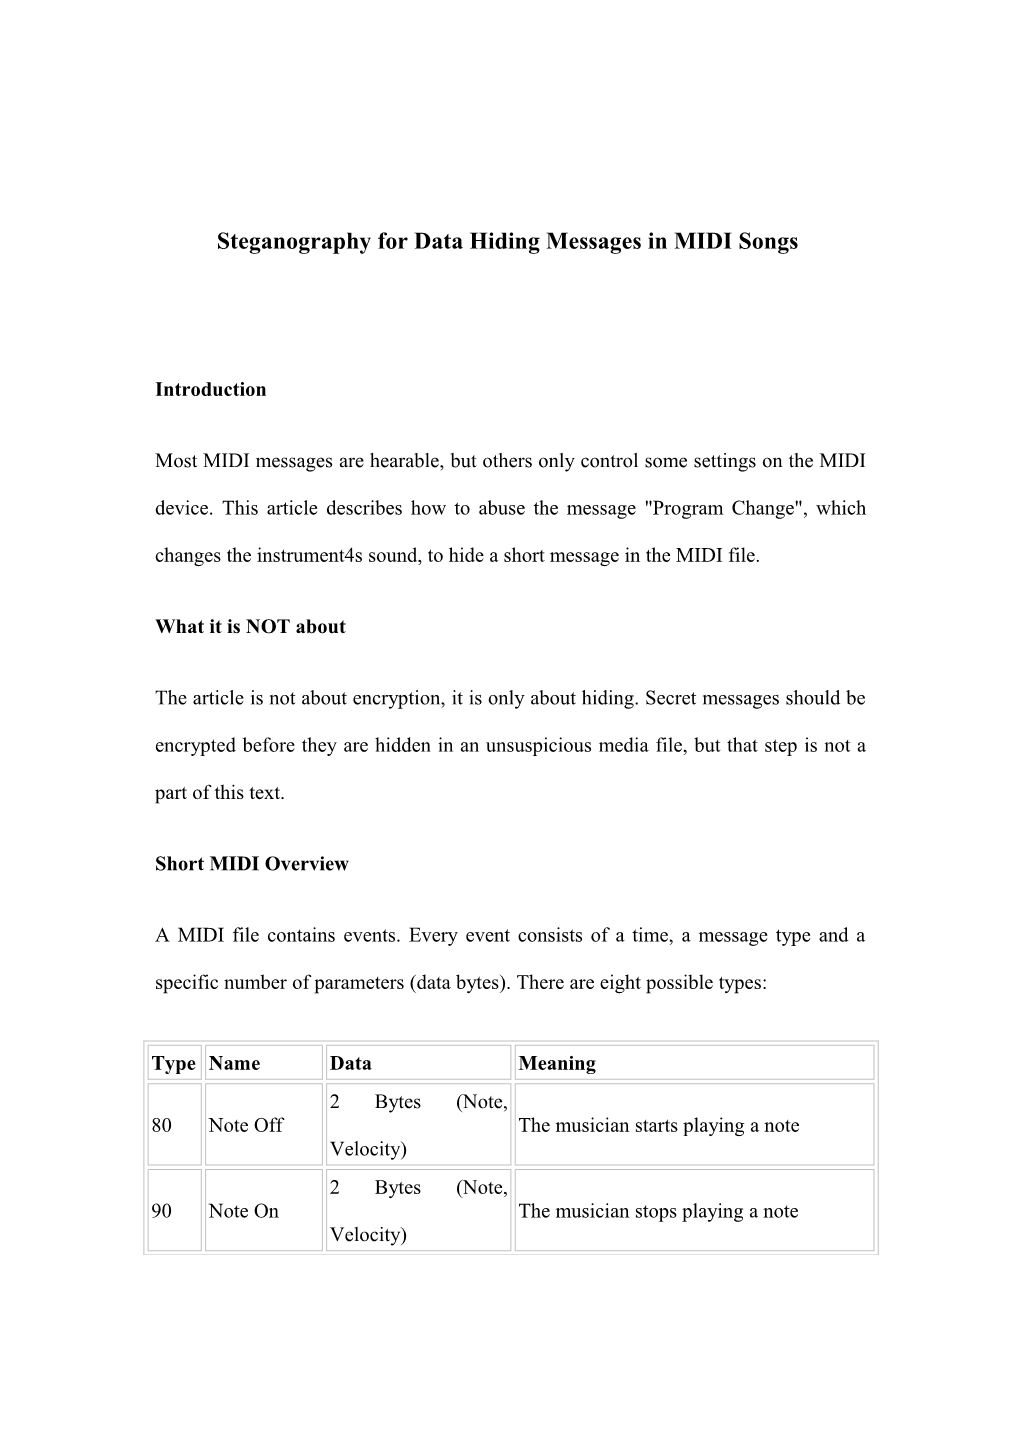 Steganography for Data Hiding Messages in MIDI Songs